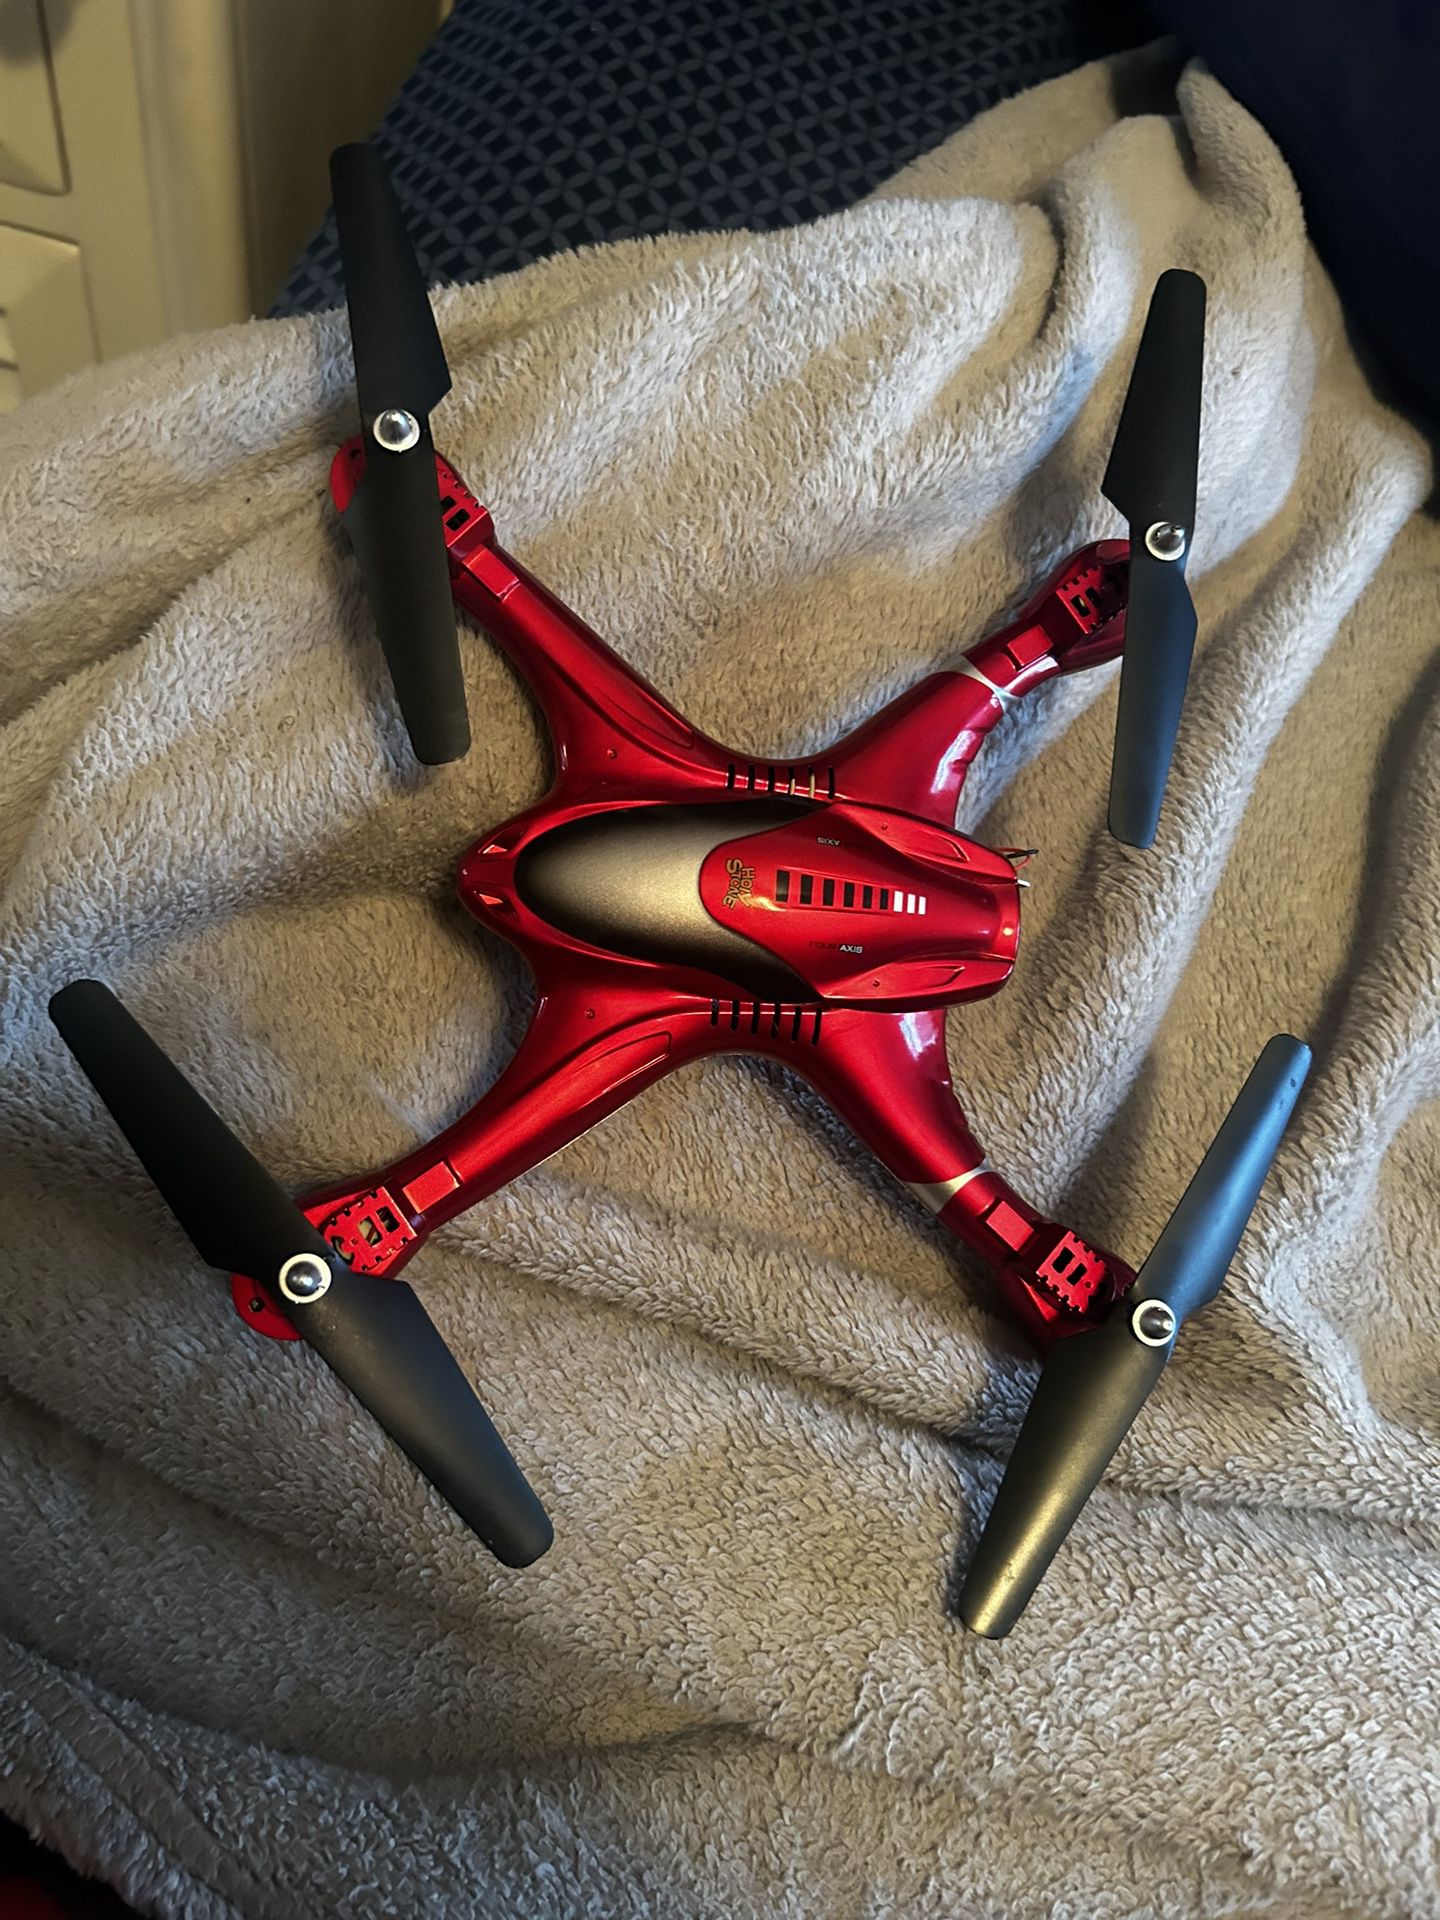 Holy stone Drone Hs200